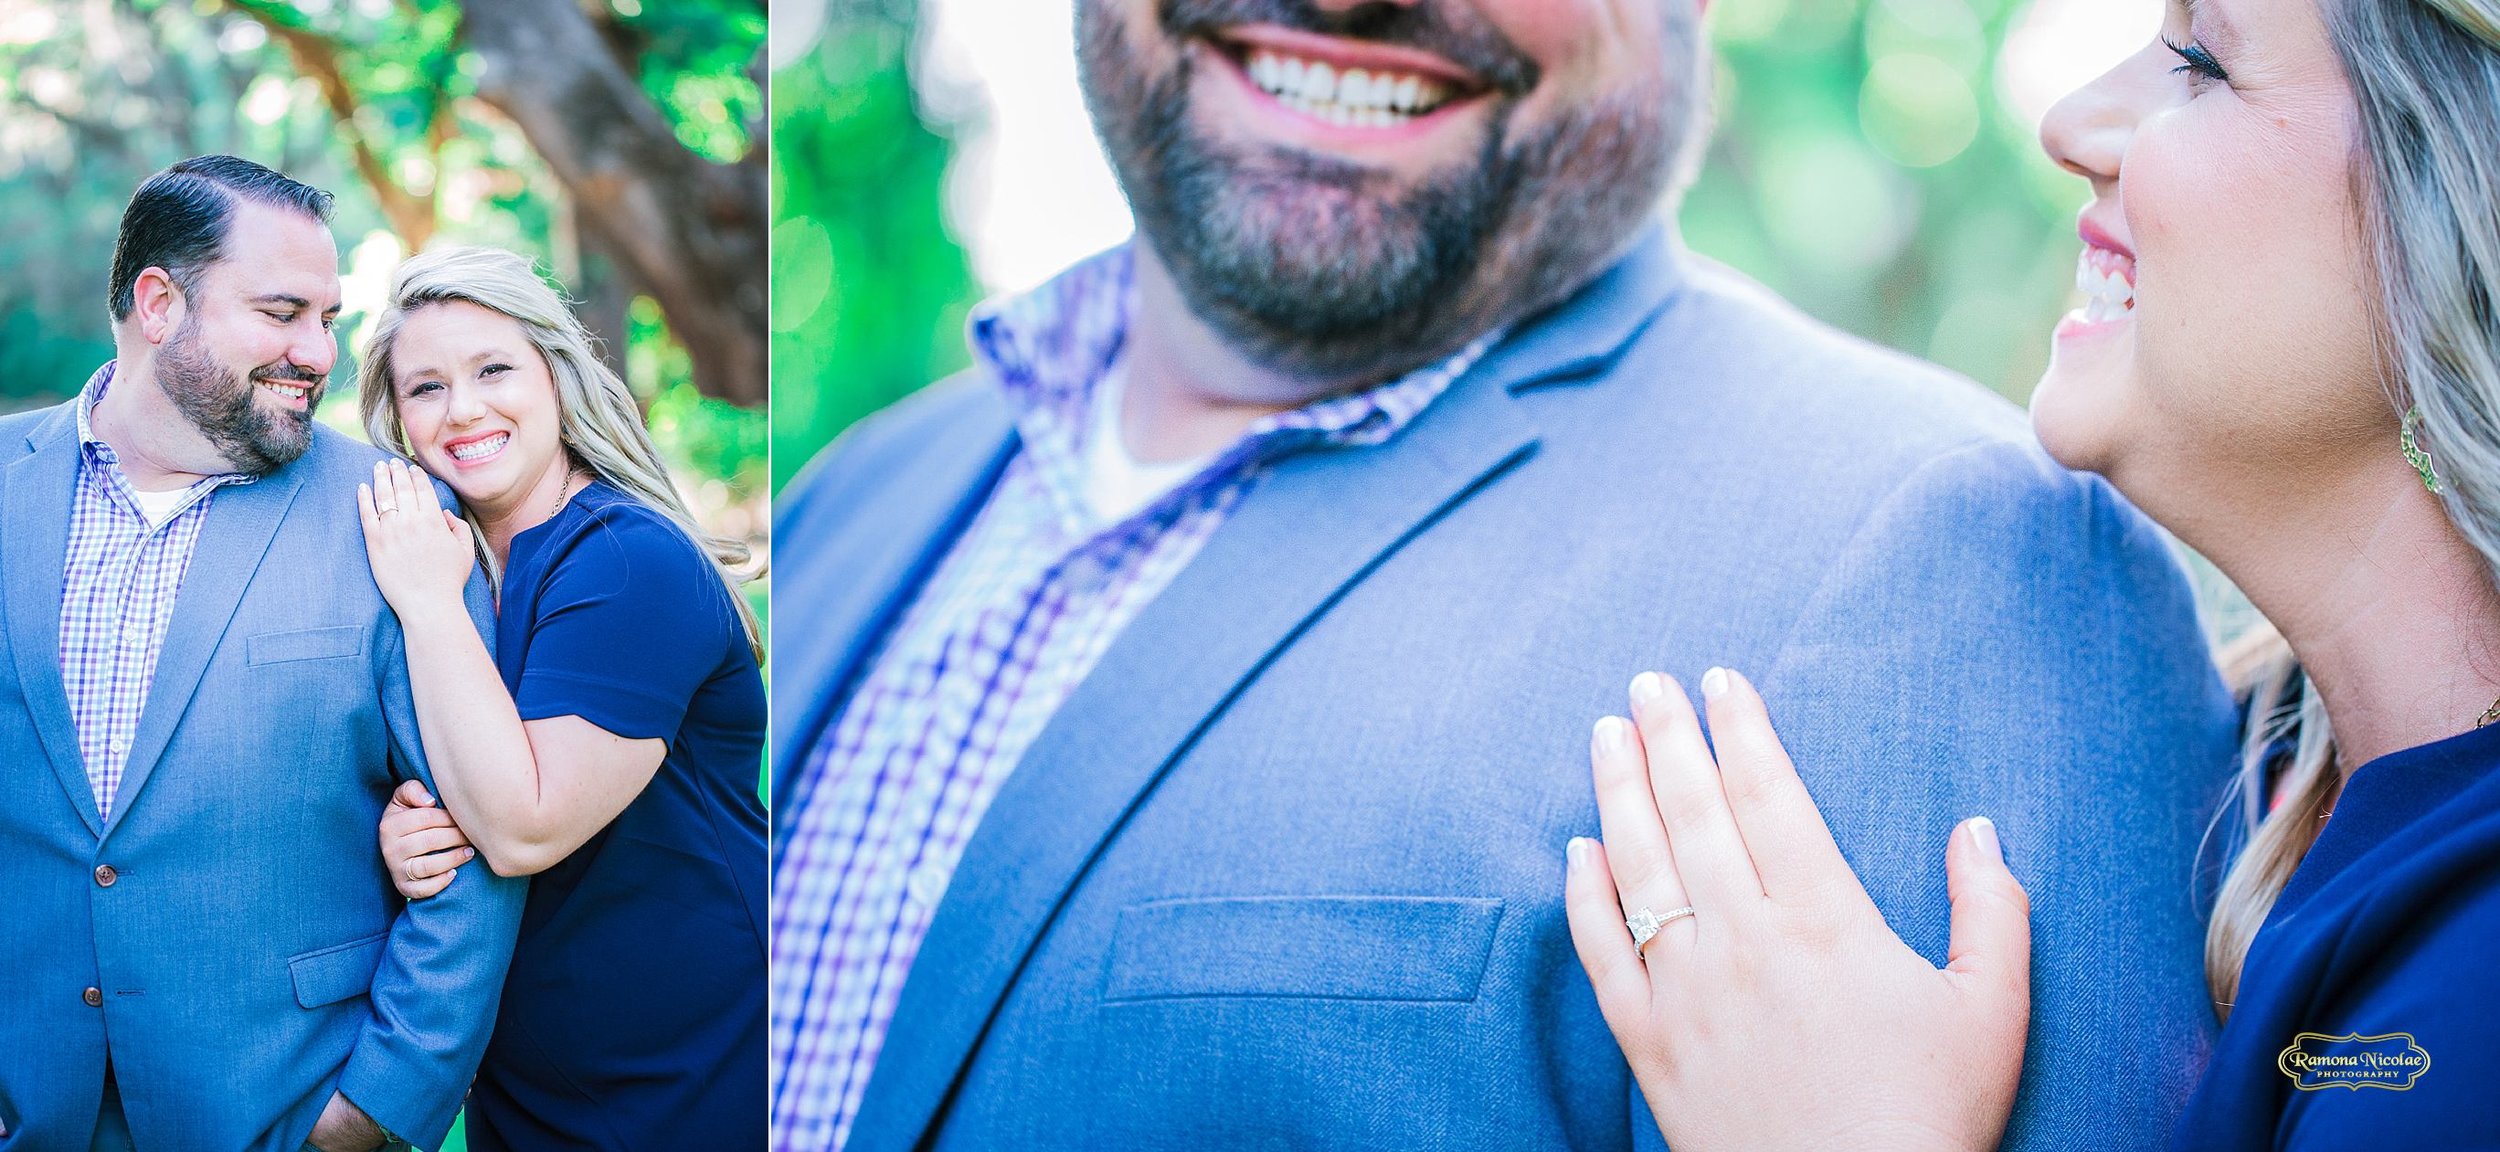 ring details during engagement session at wachesaw plantation while couple is smiling.jpg